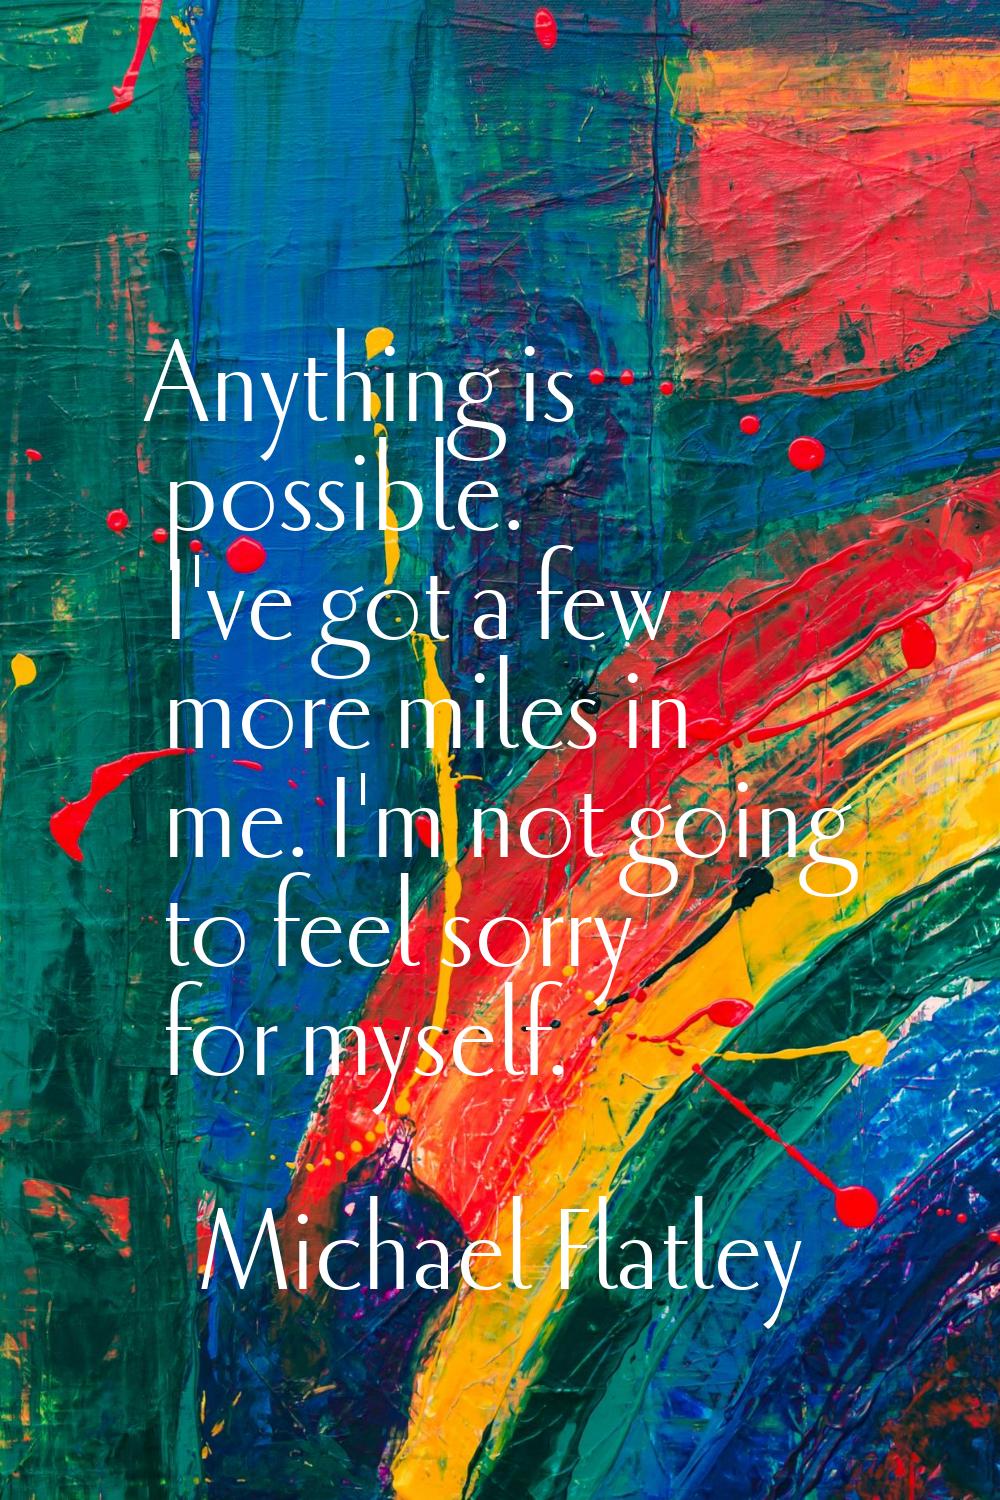 Anything is possible. I've got a few more miles in me. I'm not going to feel sorry for myself.